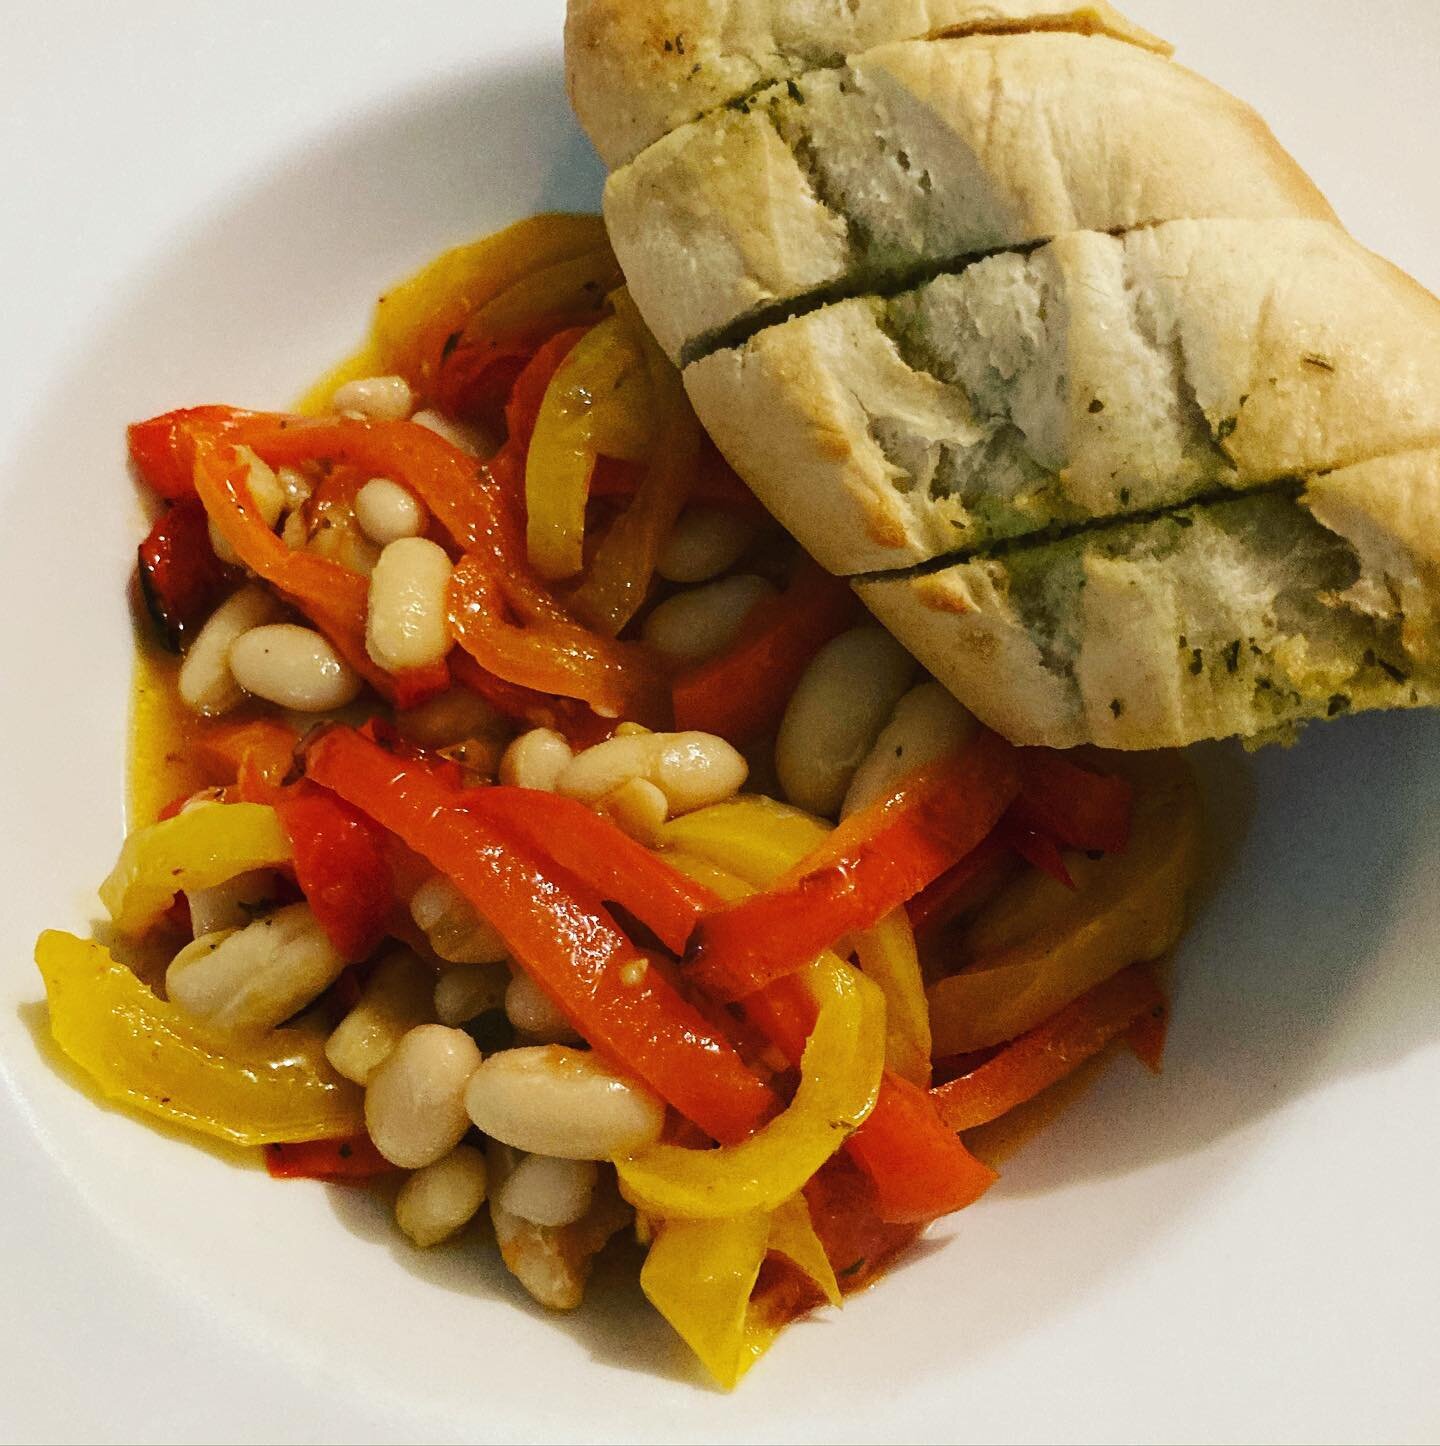 Roasted peppers and garlicky lemony beans from Roasting Tin Around the World to medicate the worst lurgy I&rsquo;ve had in years. When is bedtime please?

#veggiemeals #roastingtinaroundtheworld #veggiefood